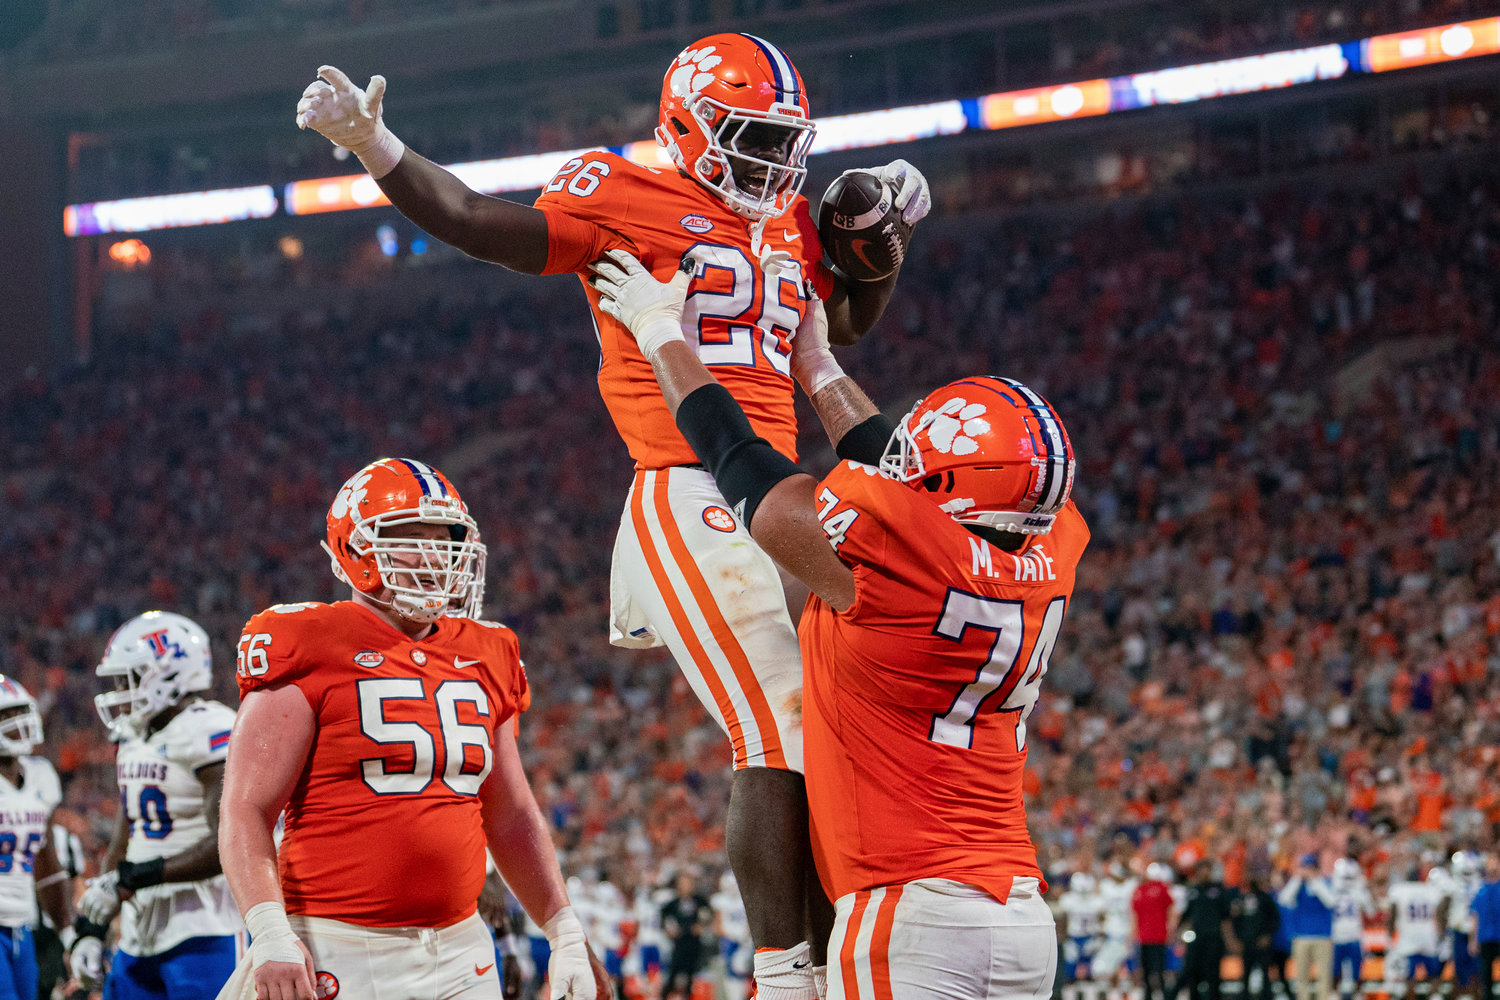 Clemson running back Phil Mafah (26) celebrates his touchdown against Louisiana Tech with offensive lineman Marcus Tate (74) during the second half of an NCAA college football game Saturday, Sept. 17, 2022, in Clemson, S.C. (AP Photo/Jacob Kupferman)